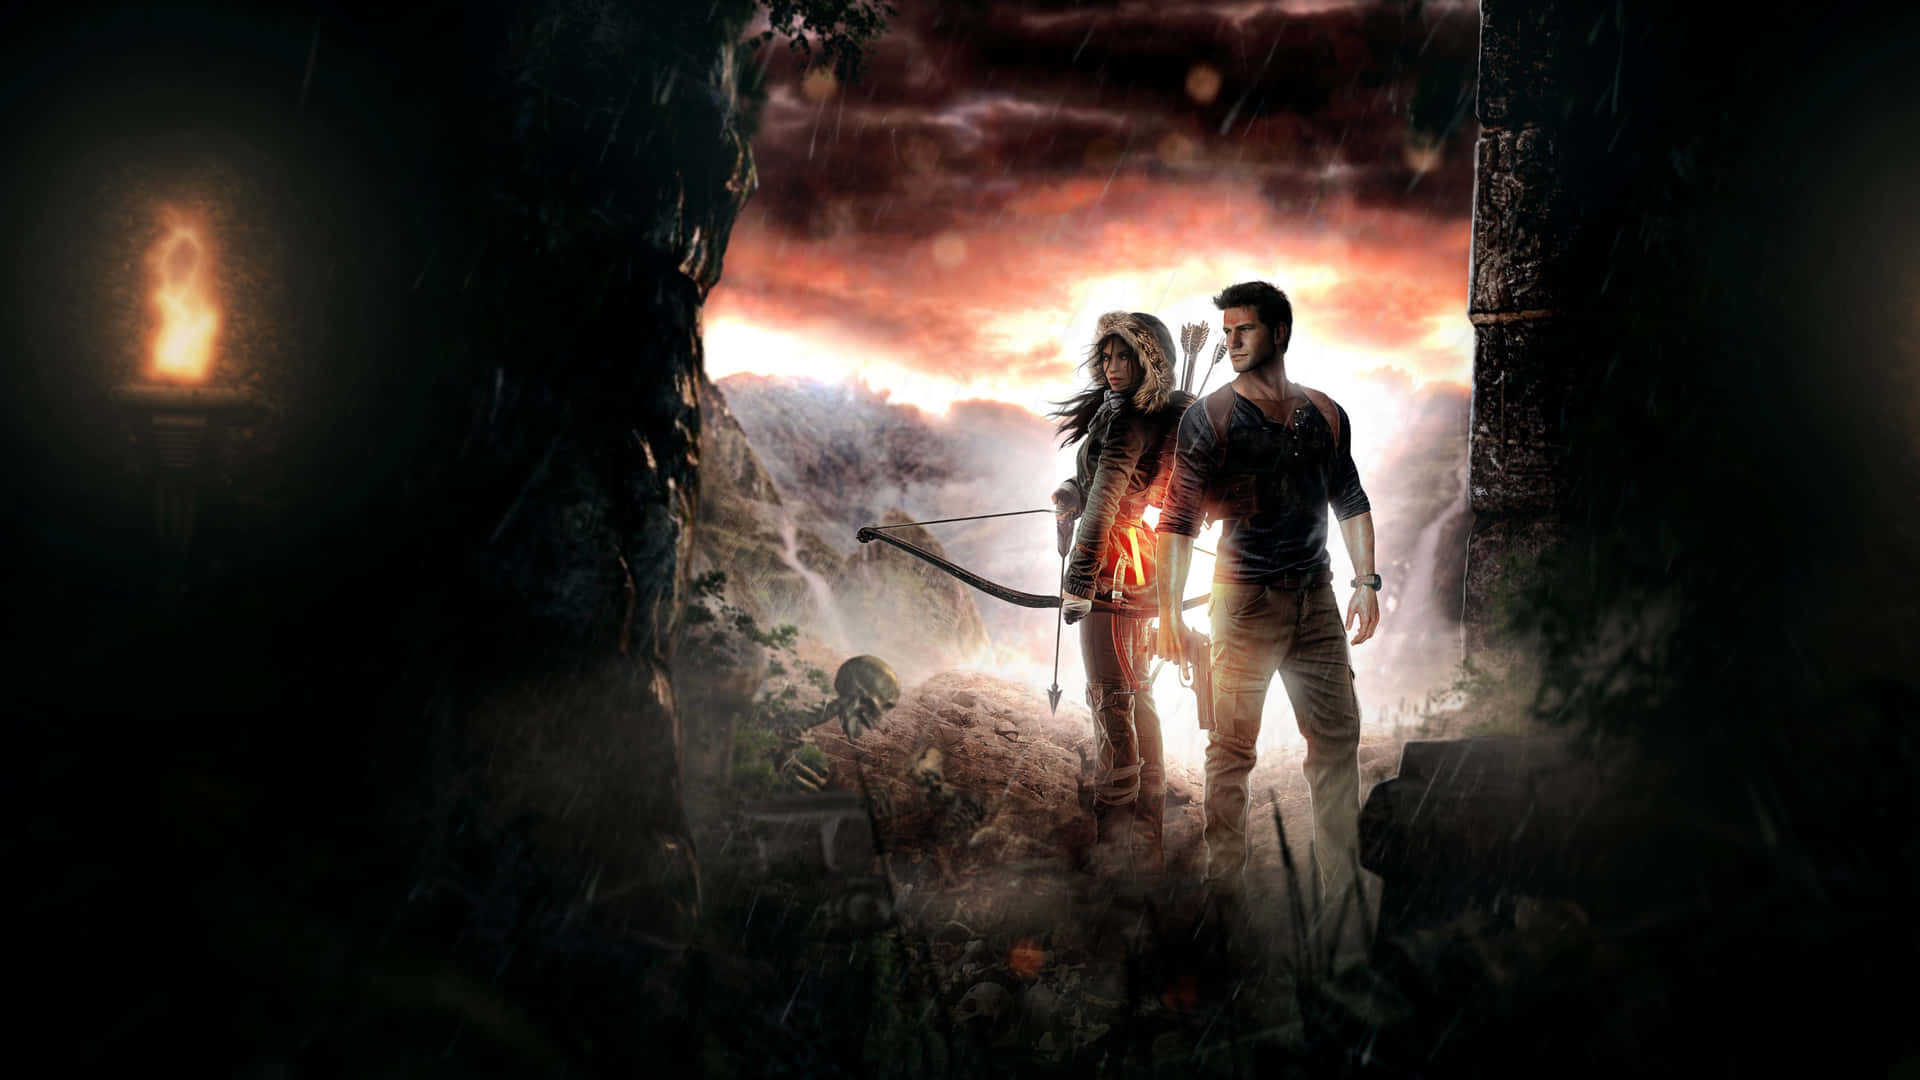 A Man And Woman Standing In A Dark Cave Wallpaper